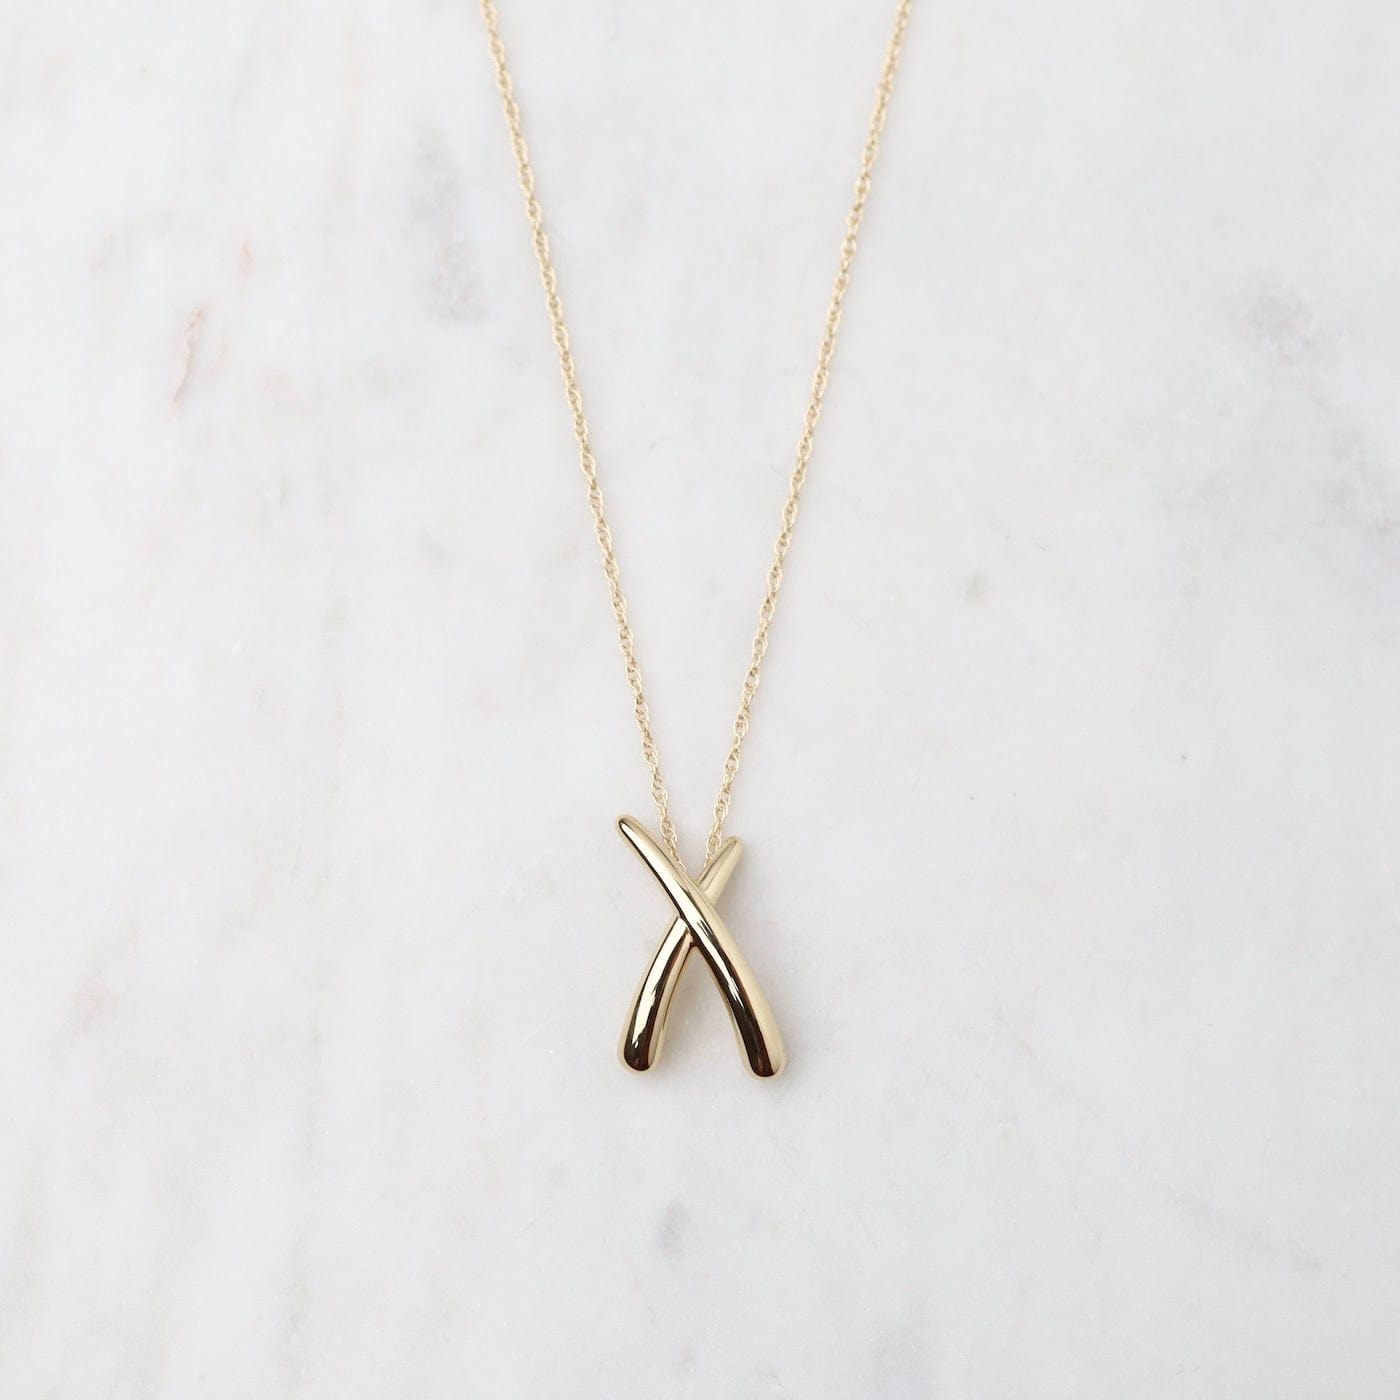 Buy Tiffany & Co. Kiss X Necklace 18k Yellow Gold Online in India - Etsy